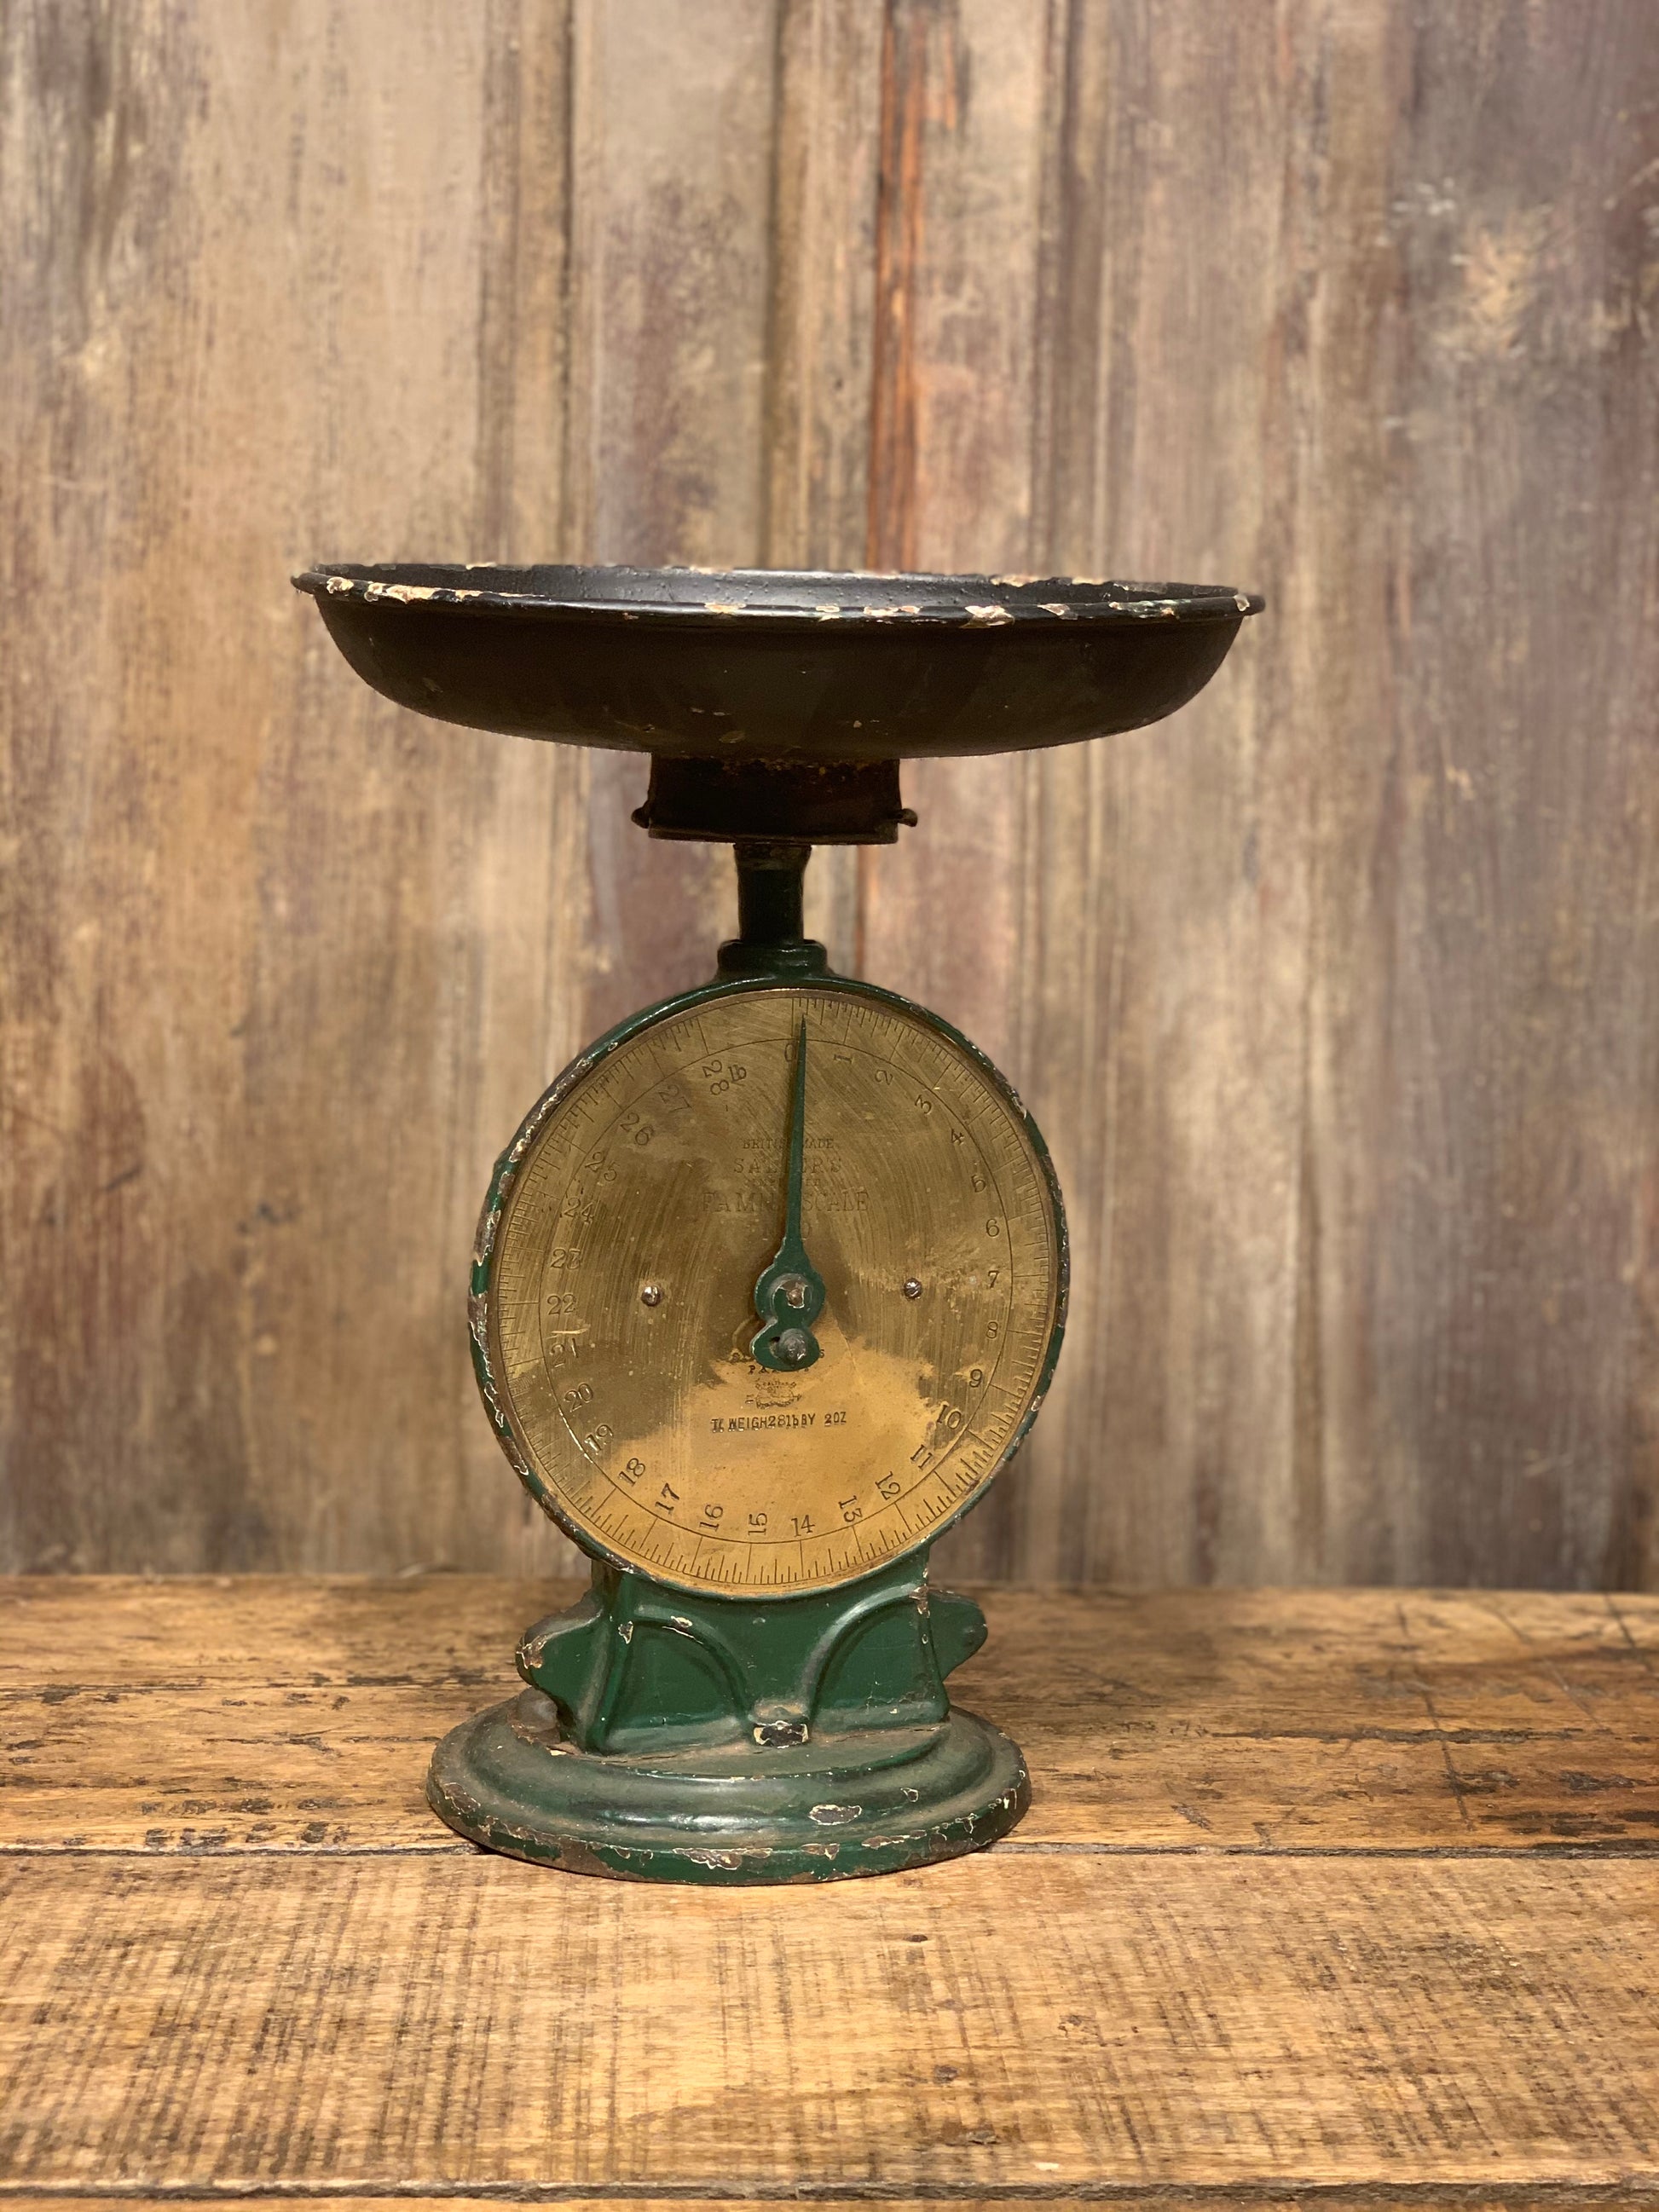 Antique Italian Weight Balance Scale, Antique Rustic Hanging Scale, Kitchen  Decor, Rustic Home Decor,vintage Manual Scale 